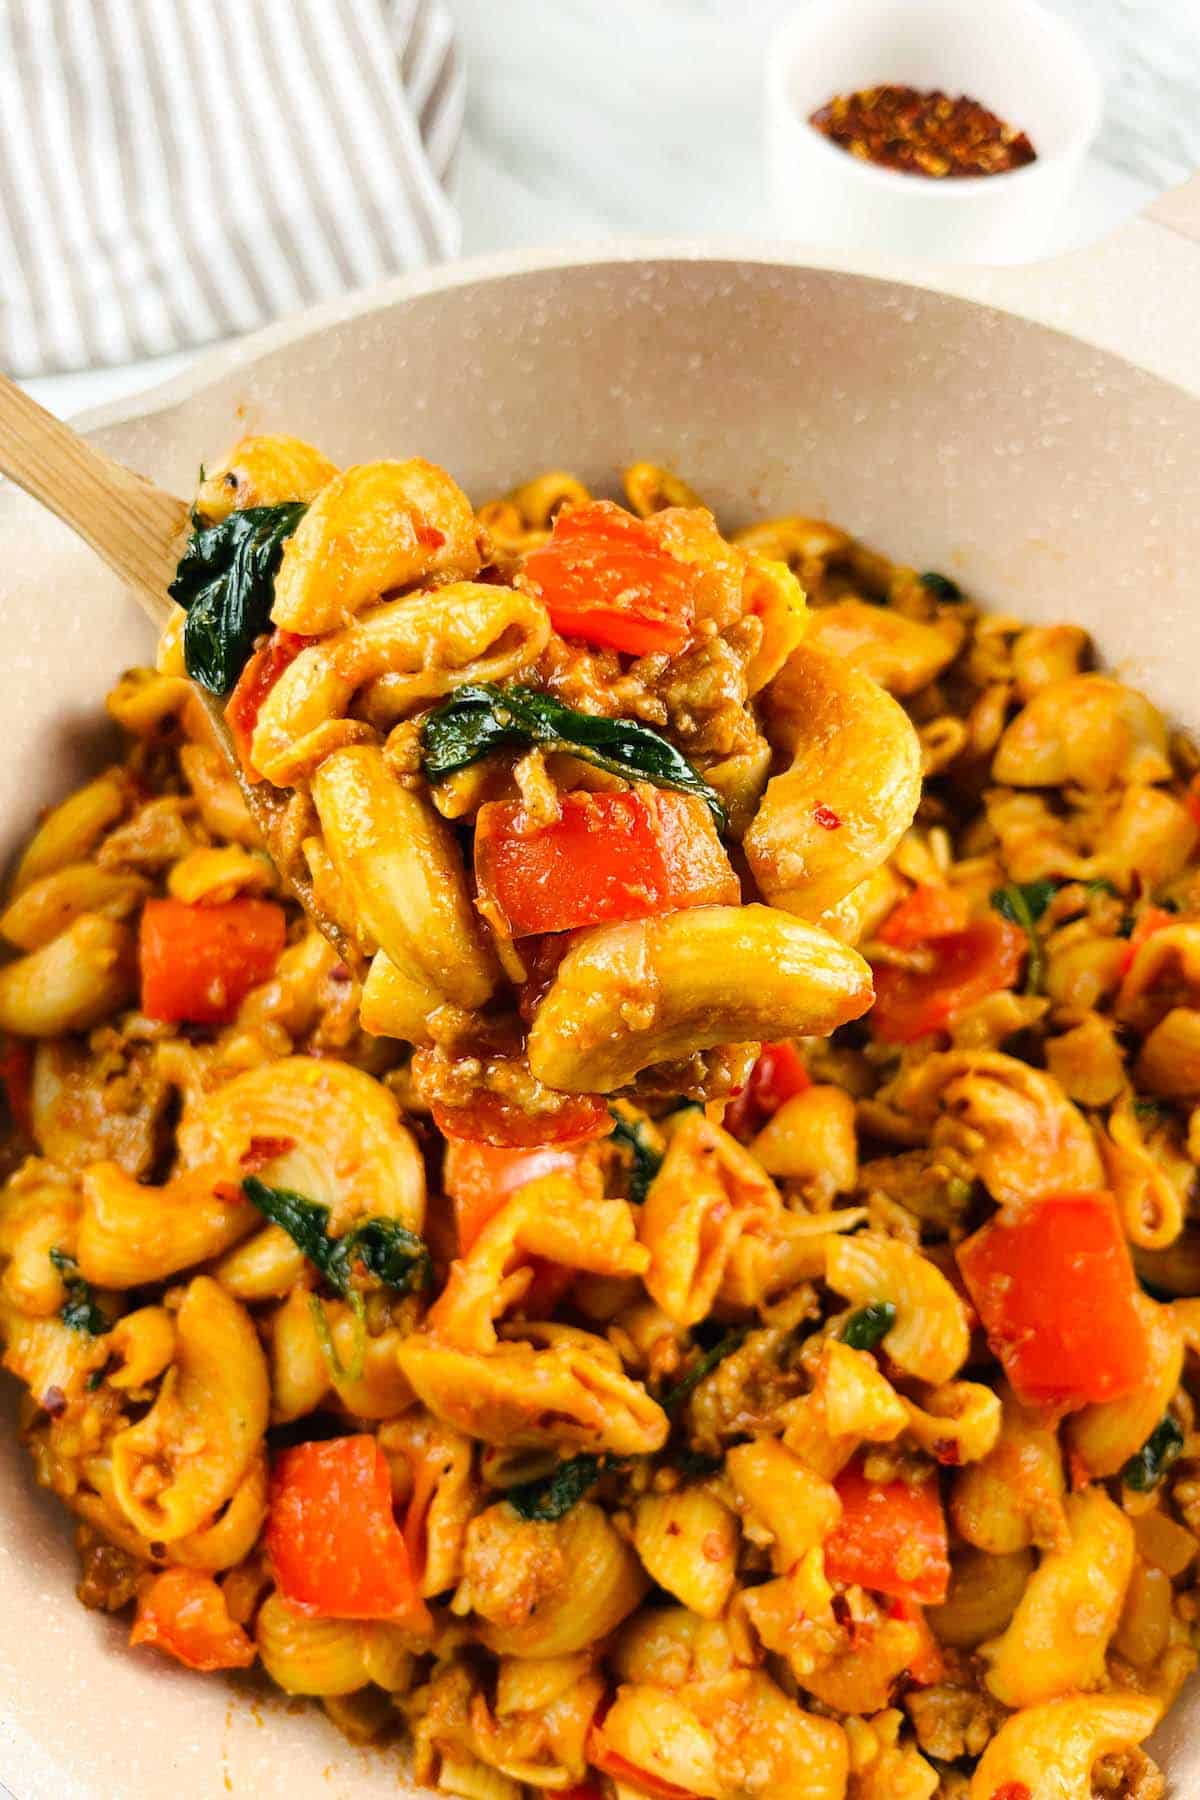 Pasta Dish : Pasta in a pot with ground beef, red bell pepper and spinach.